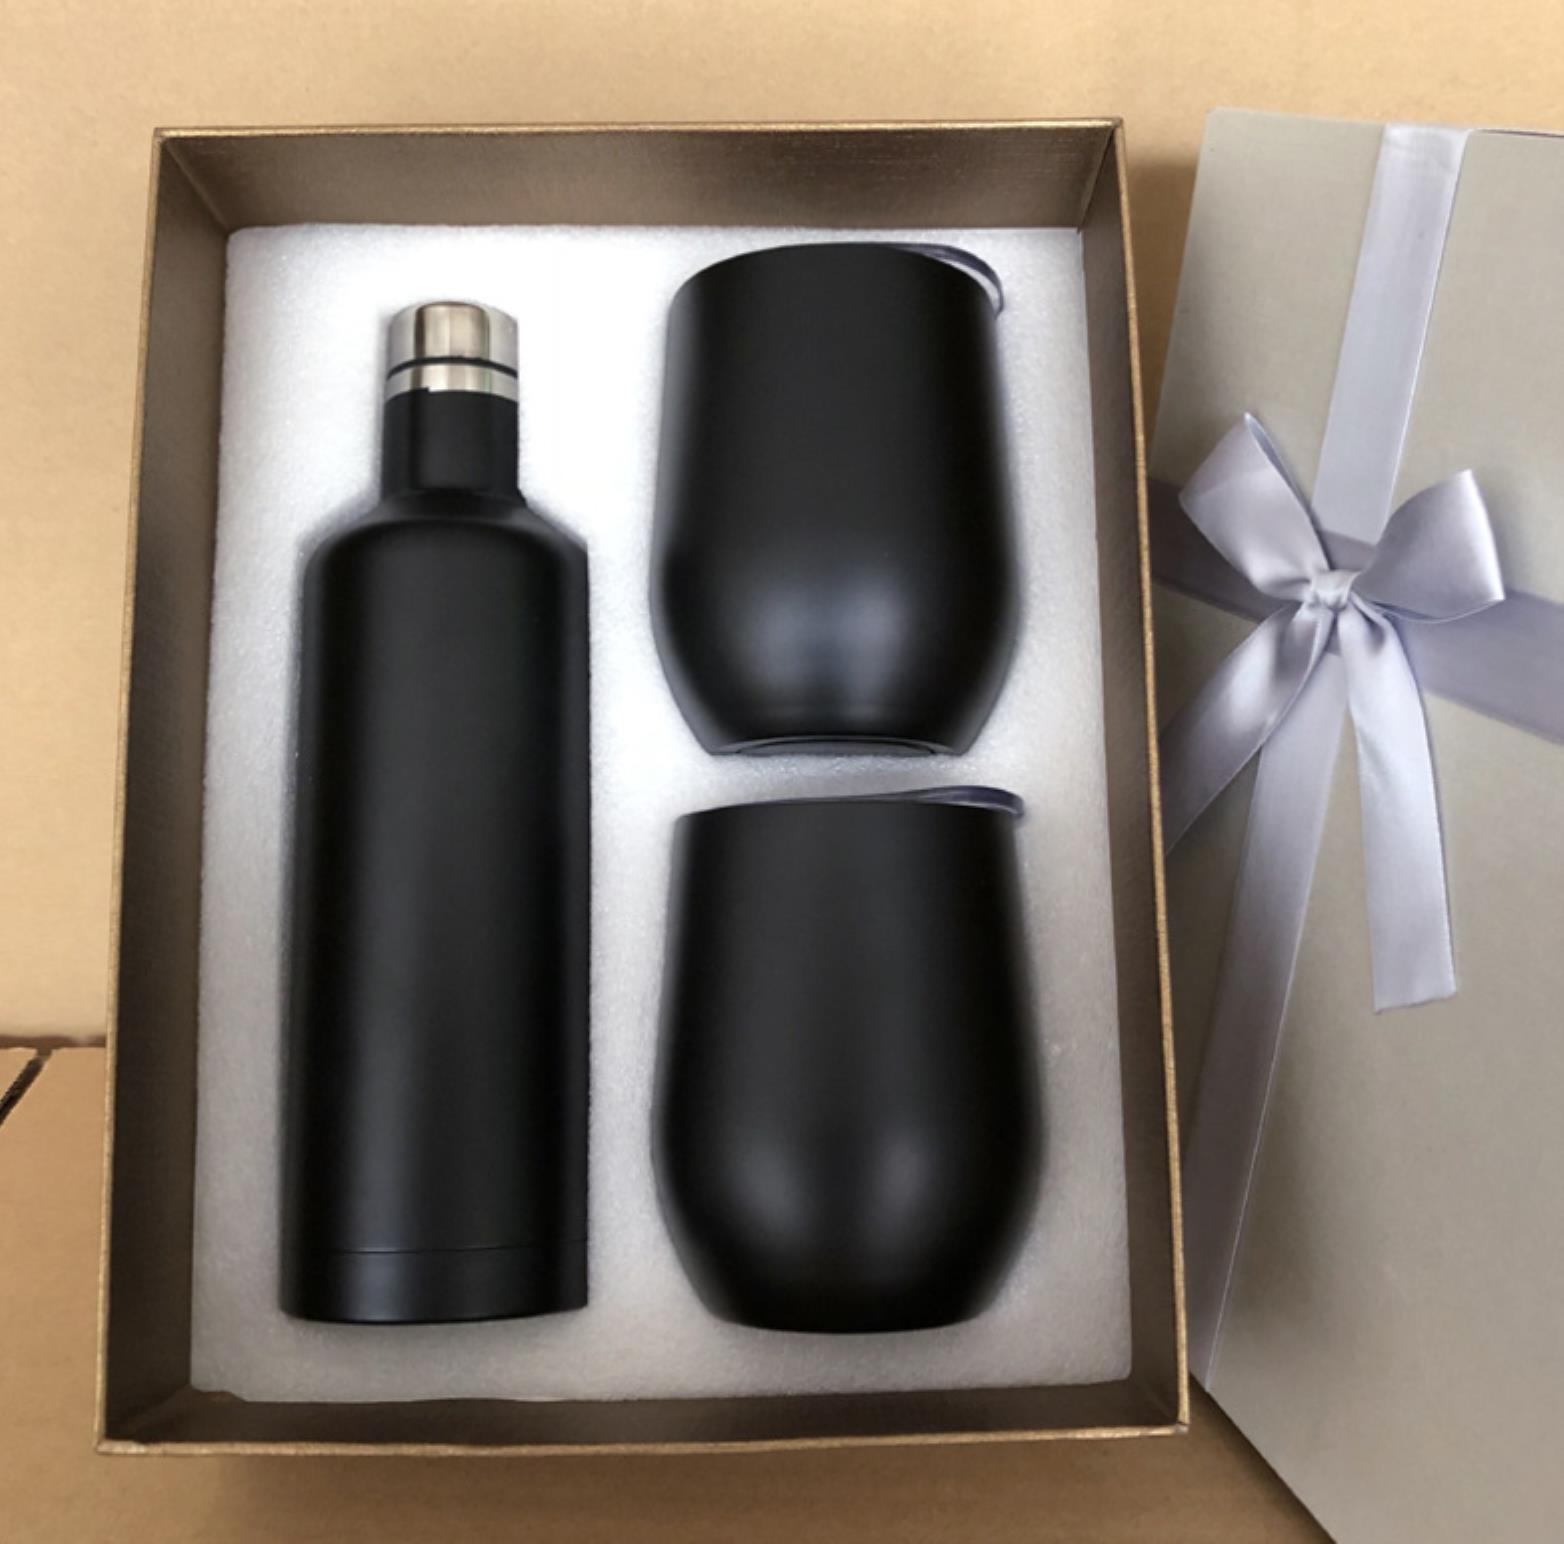 

Wine Bottle Set With Two 12Oz Wine Tumblers Stainless Steel Bottles With Egg Shaped Mug Insulated Vacuum Glass Set Gift Sea Shipping Jnqcn, As pics